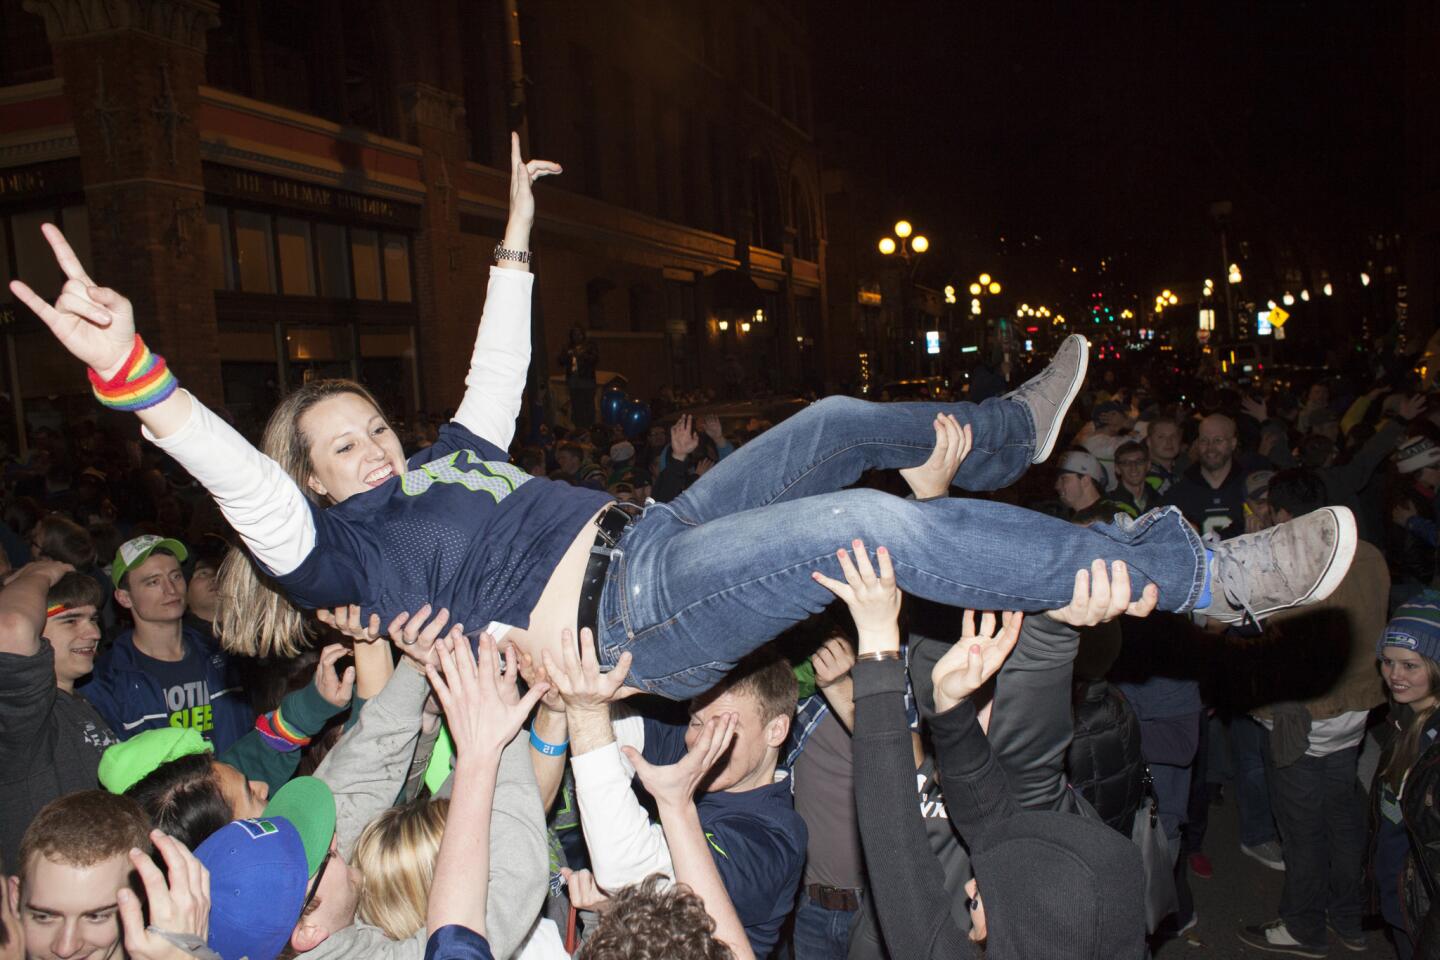 Seattle Seahawks fan Sara Hatfielf surfs through the crowd in the middle of 1st Avenue on Sunday night in Seattle. Hundreds of people flooded the streets of downtown Seattle after the Seahawks defeated the Denver Broncos in the Super Bowl.